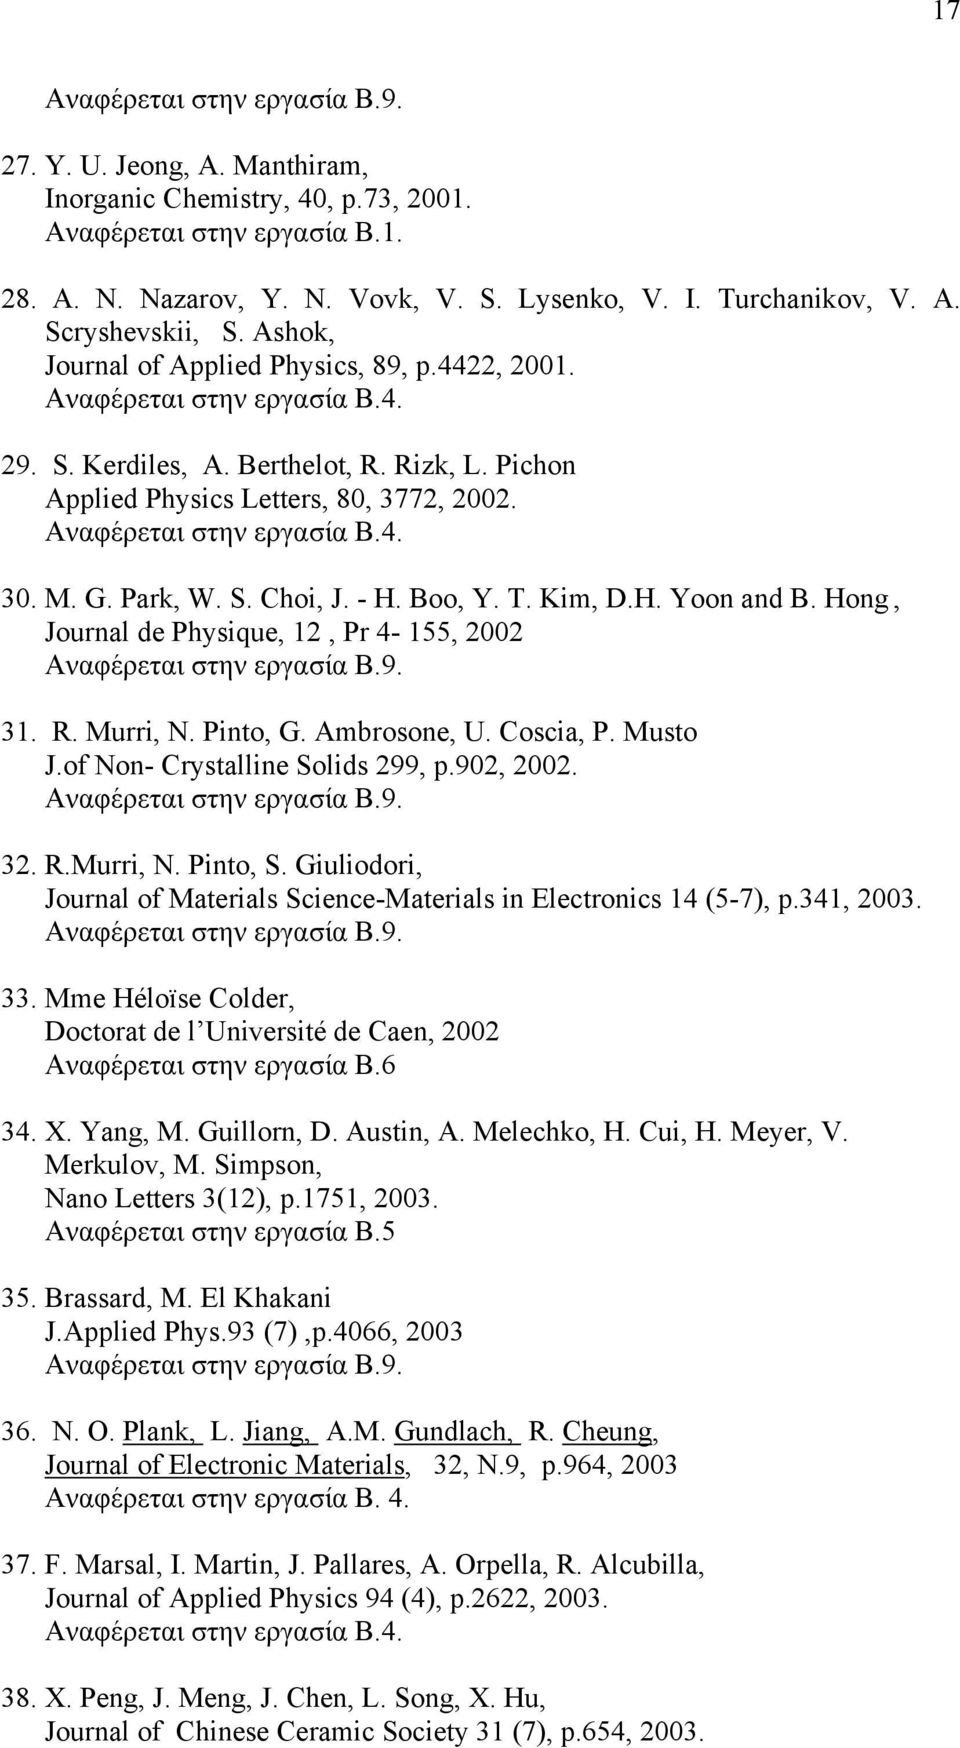 H. Yoon and B. Hong, Journal de Physique, 12, Pr 4-155, 2002 Αναφέρεται στην εργασία Β.9. 31. R. Murri, N. Pinto, G. Ambrosone, U. Coscia, P. Musto J.of Non- Crystalline Solids 299, p.902, 2002.